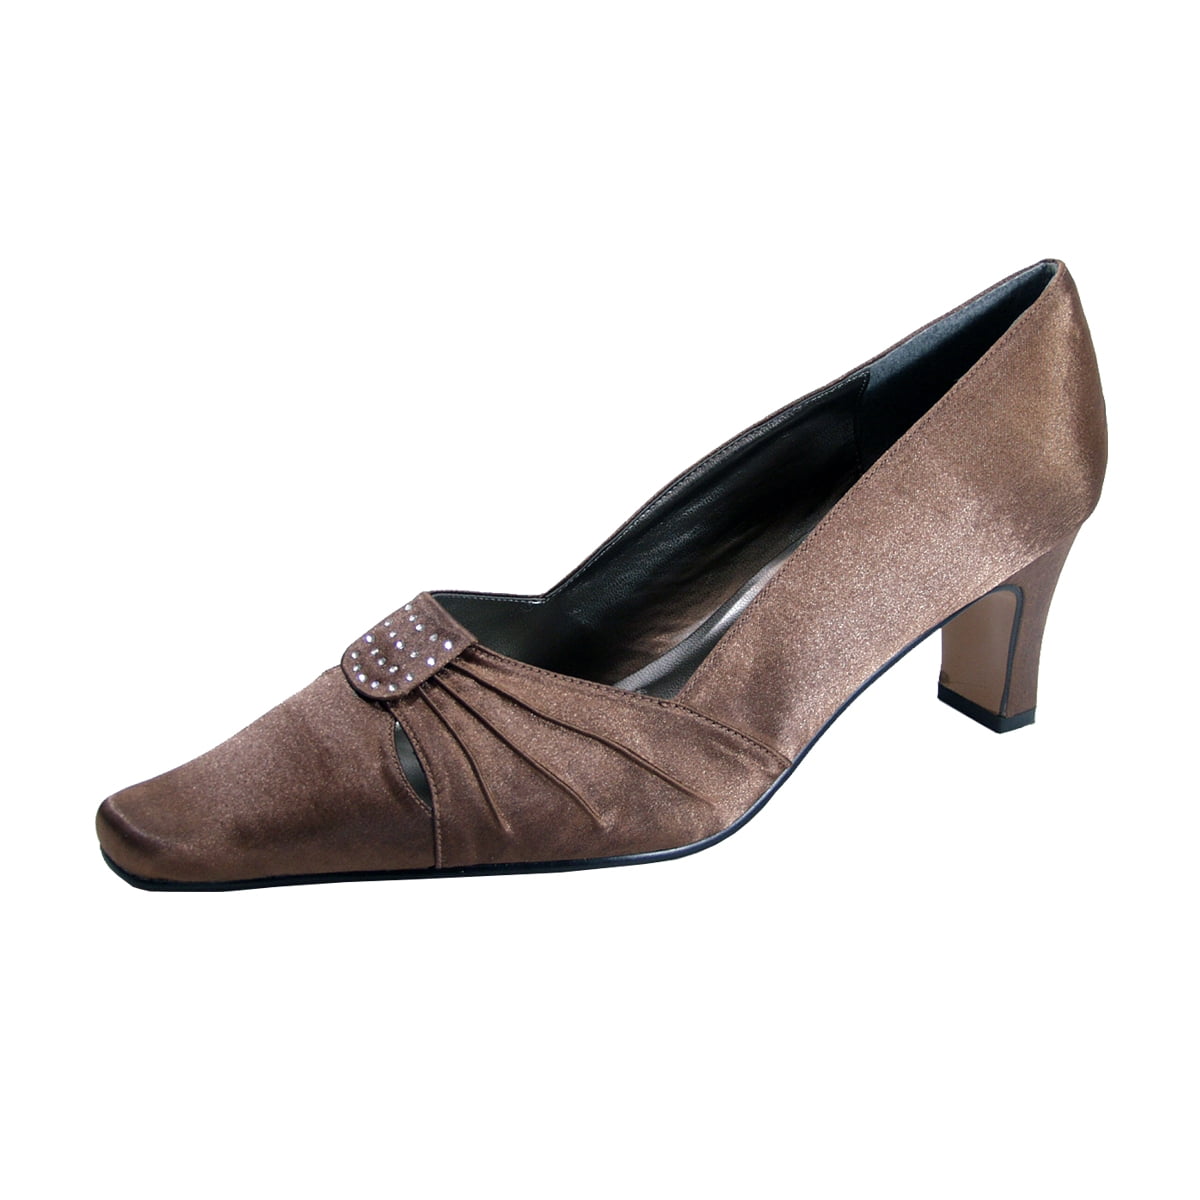 extra wide dress shoes for women